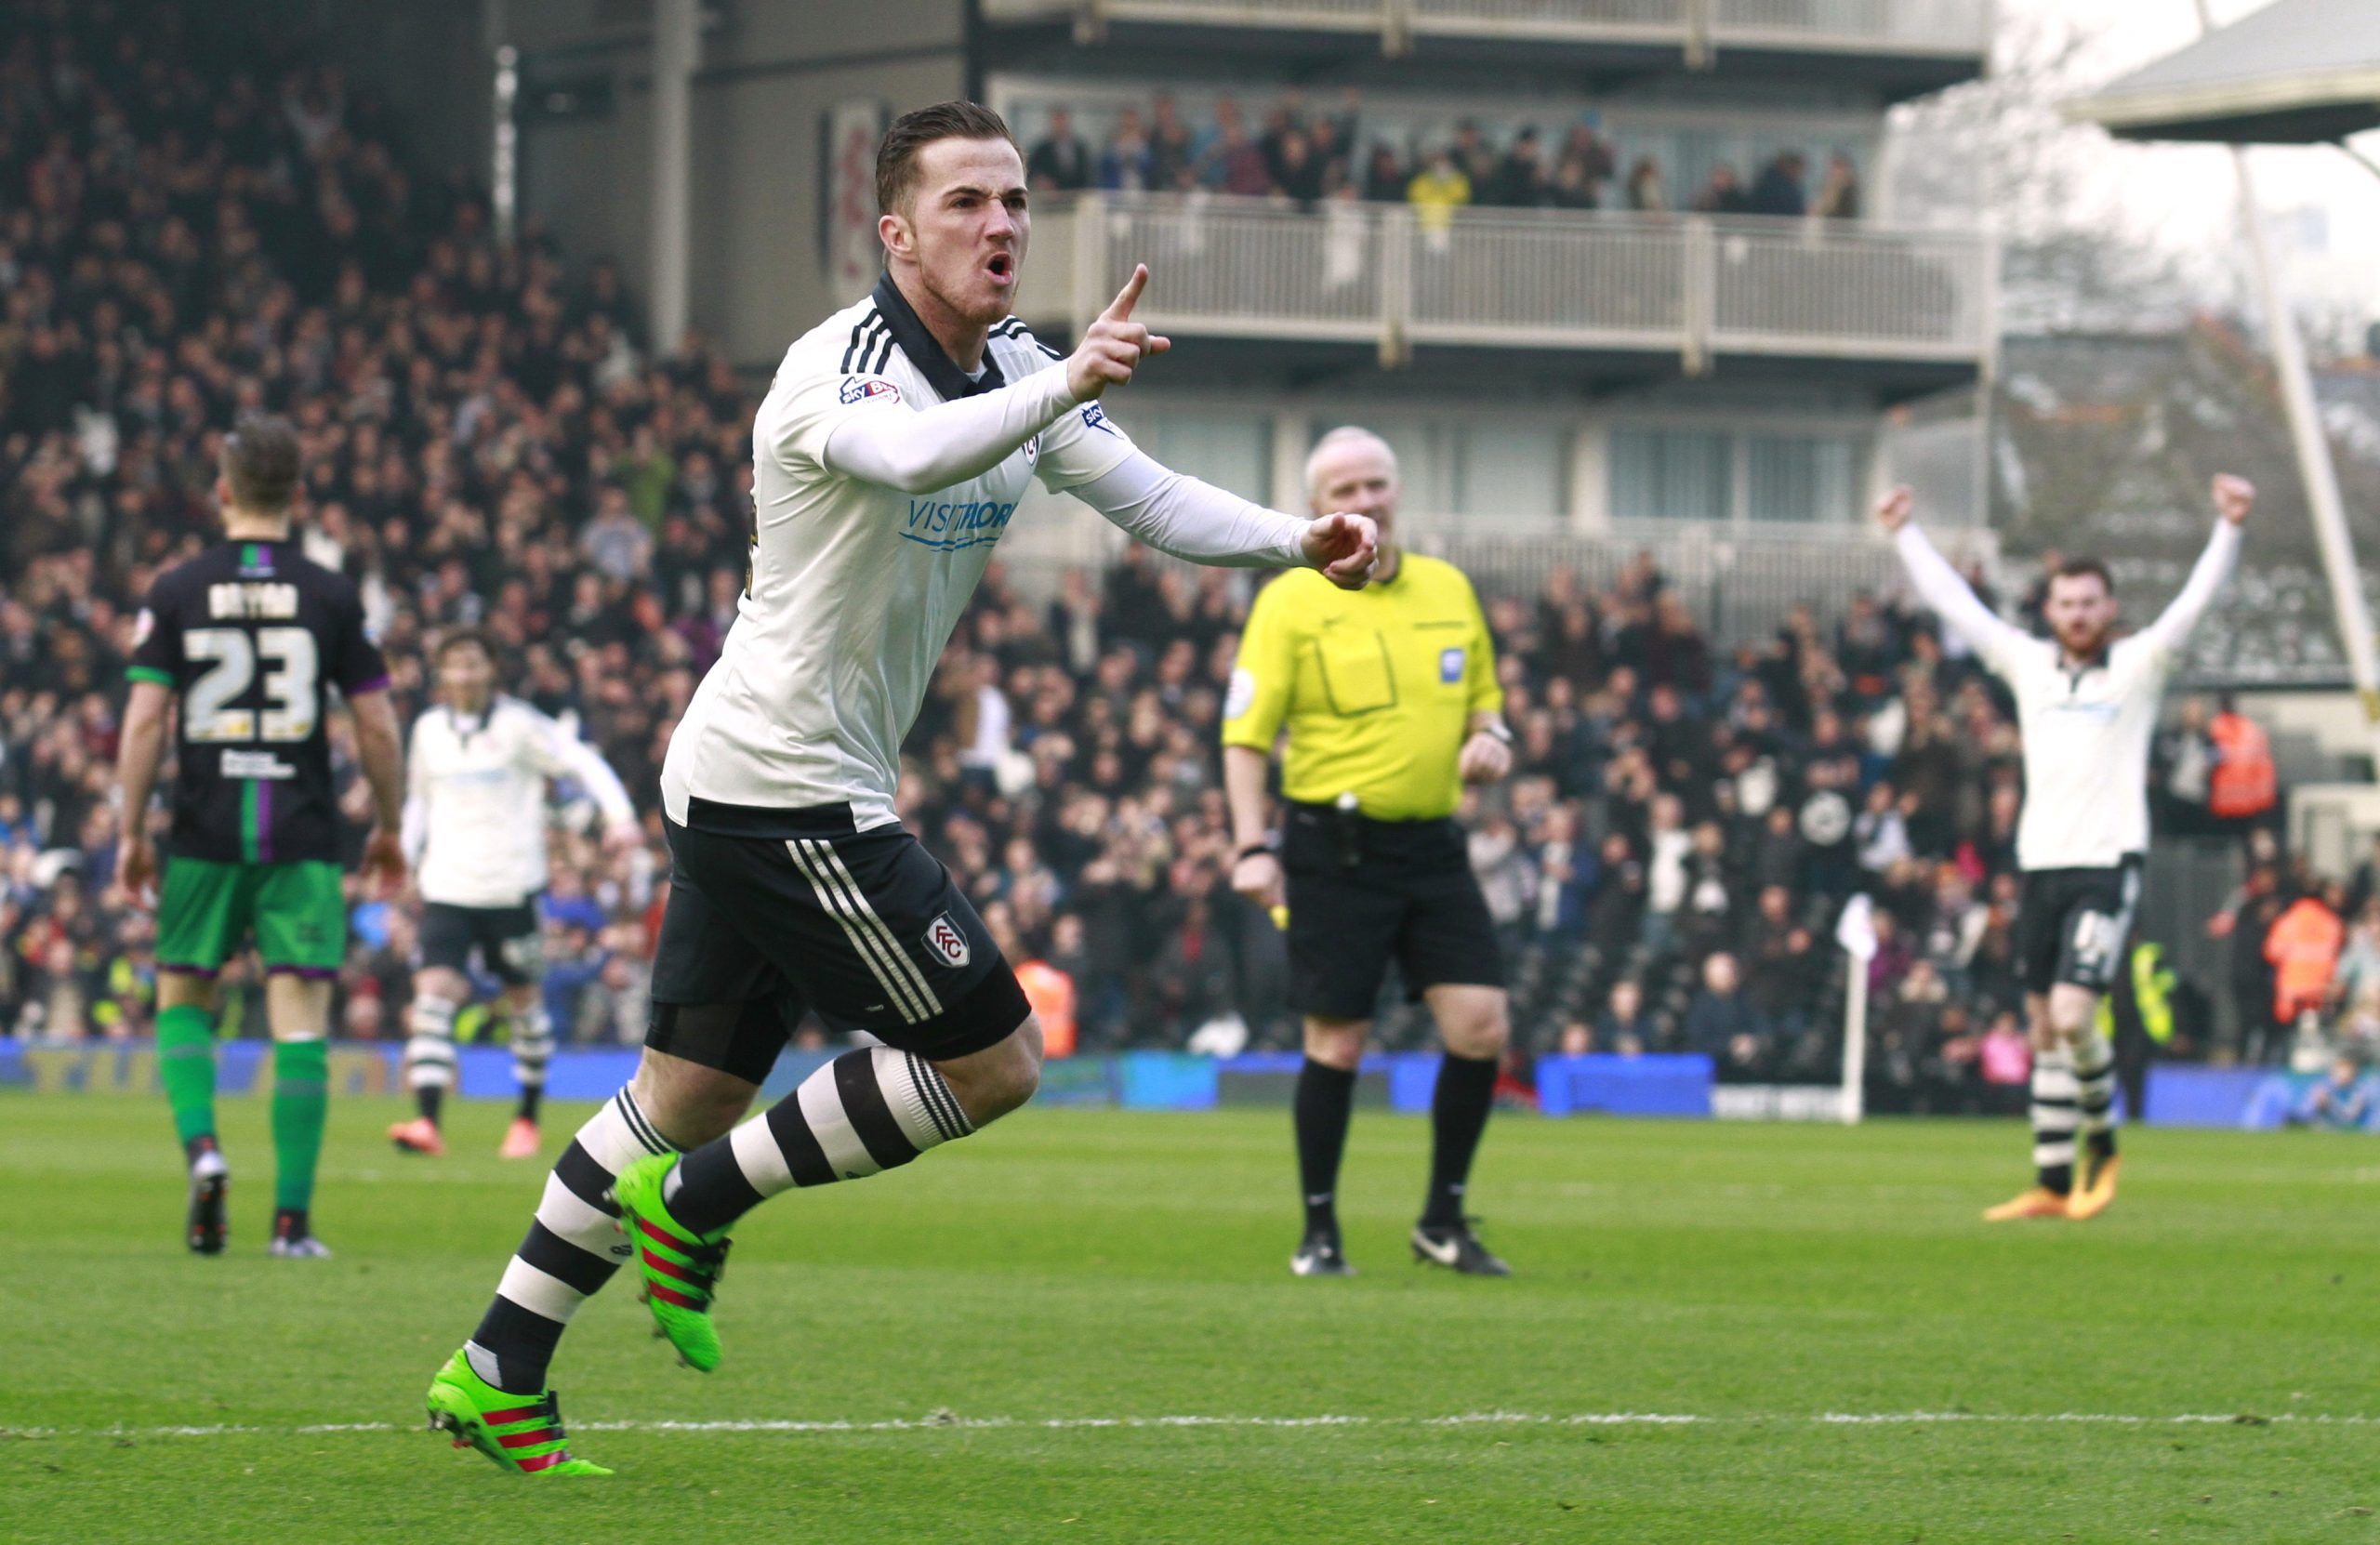 mccormack-rangers-le-guen-championship-premiershipRoss McCormack celebrates after scoring the first goal for Fulham 
Mandatory Credit: Action Images / John Marsh 
Livepic 
EDITORIAL USE ONLY. No use with unauthorized audio, video, data, fixture lists, club/league logos or 